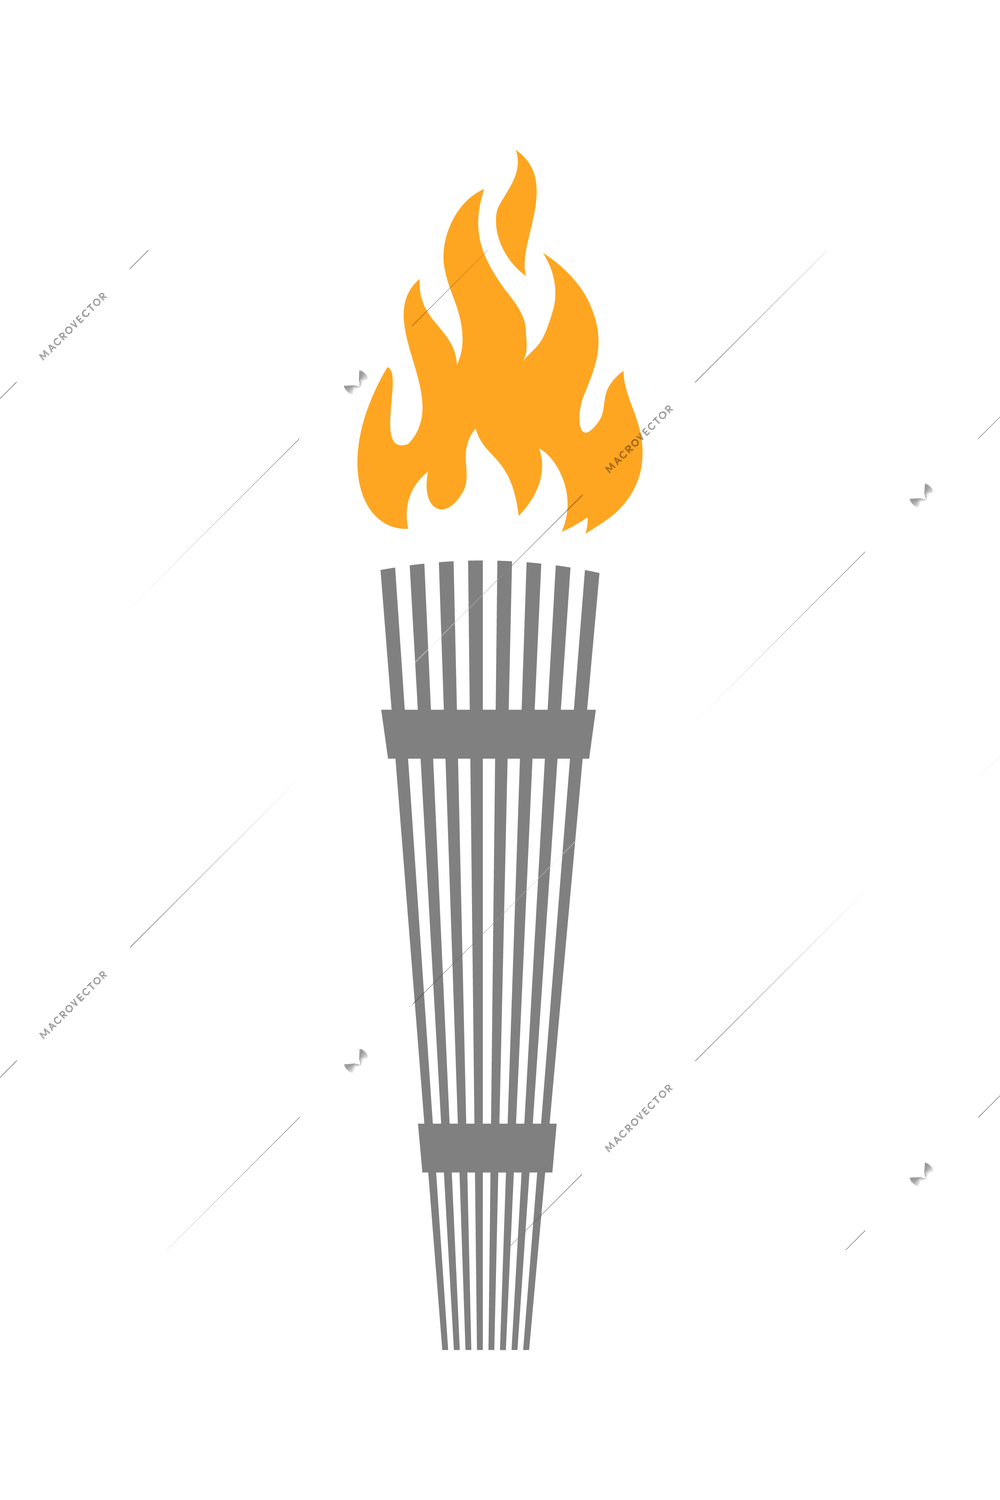 Torch composition with isolated flat icon of burning flame with ornate handle vector illustration